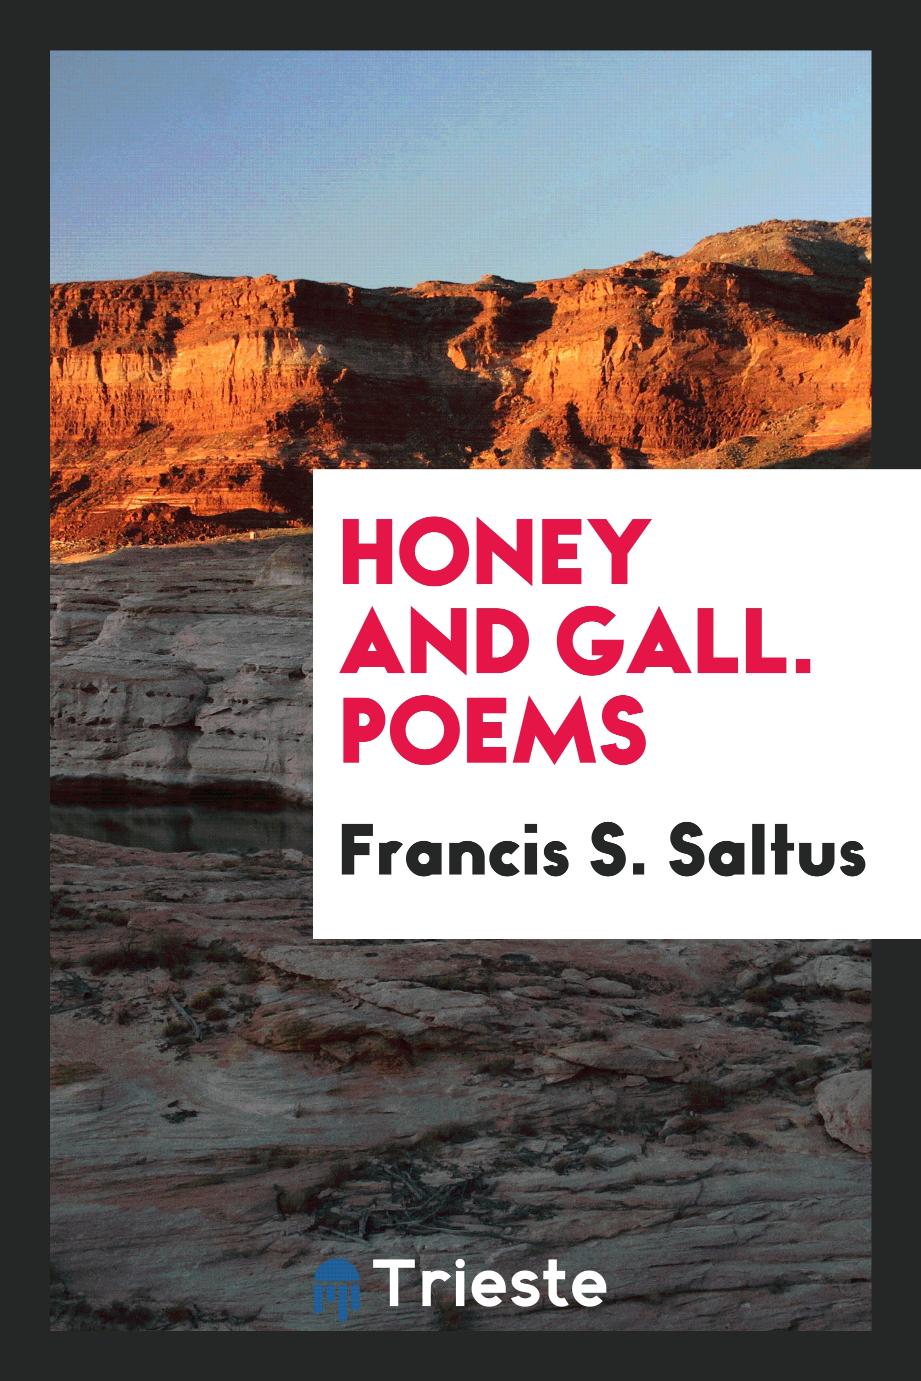 Honey and gall. Poems